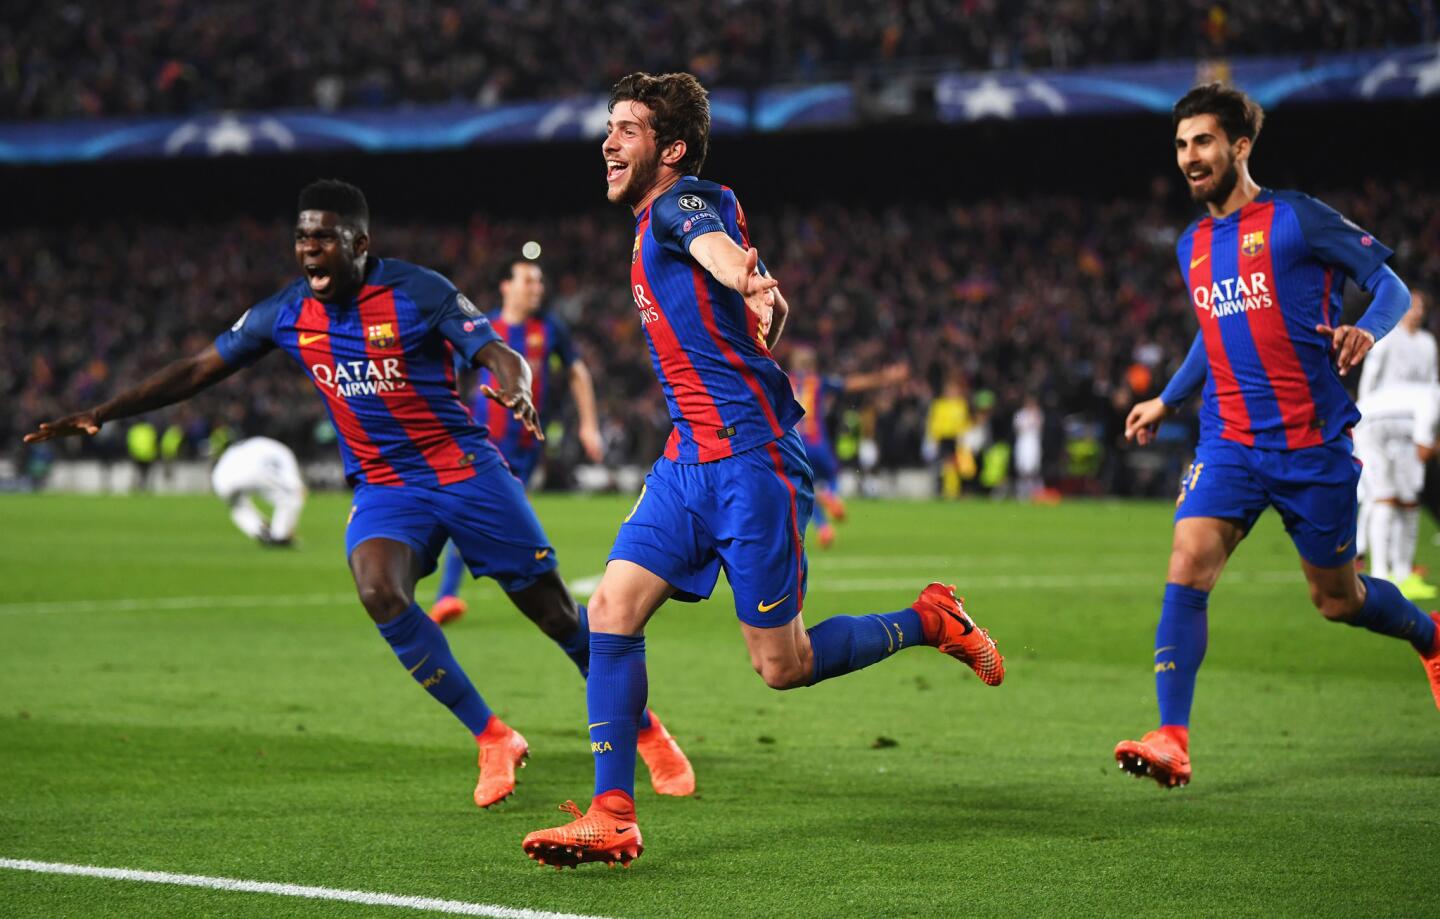 BARCELONA, SPAIN - MARCH 08: Sergi Roberto of Barcelona (C) celebrates as he scores their sixth goal during the UEFA Champions League Round of 16 second leg match between FC Barcelona and Paris Saint-Germain at Camp Nou on March 8, 2017 in Barcelona, Spain. (Photo by Laurence Griffiths/Getty Images) ** OUTS - ELSENT, FPG, CM - OUTS * NM, PH, VA if sourced by CT, LA or MoD **